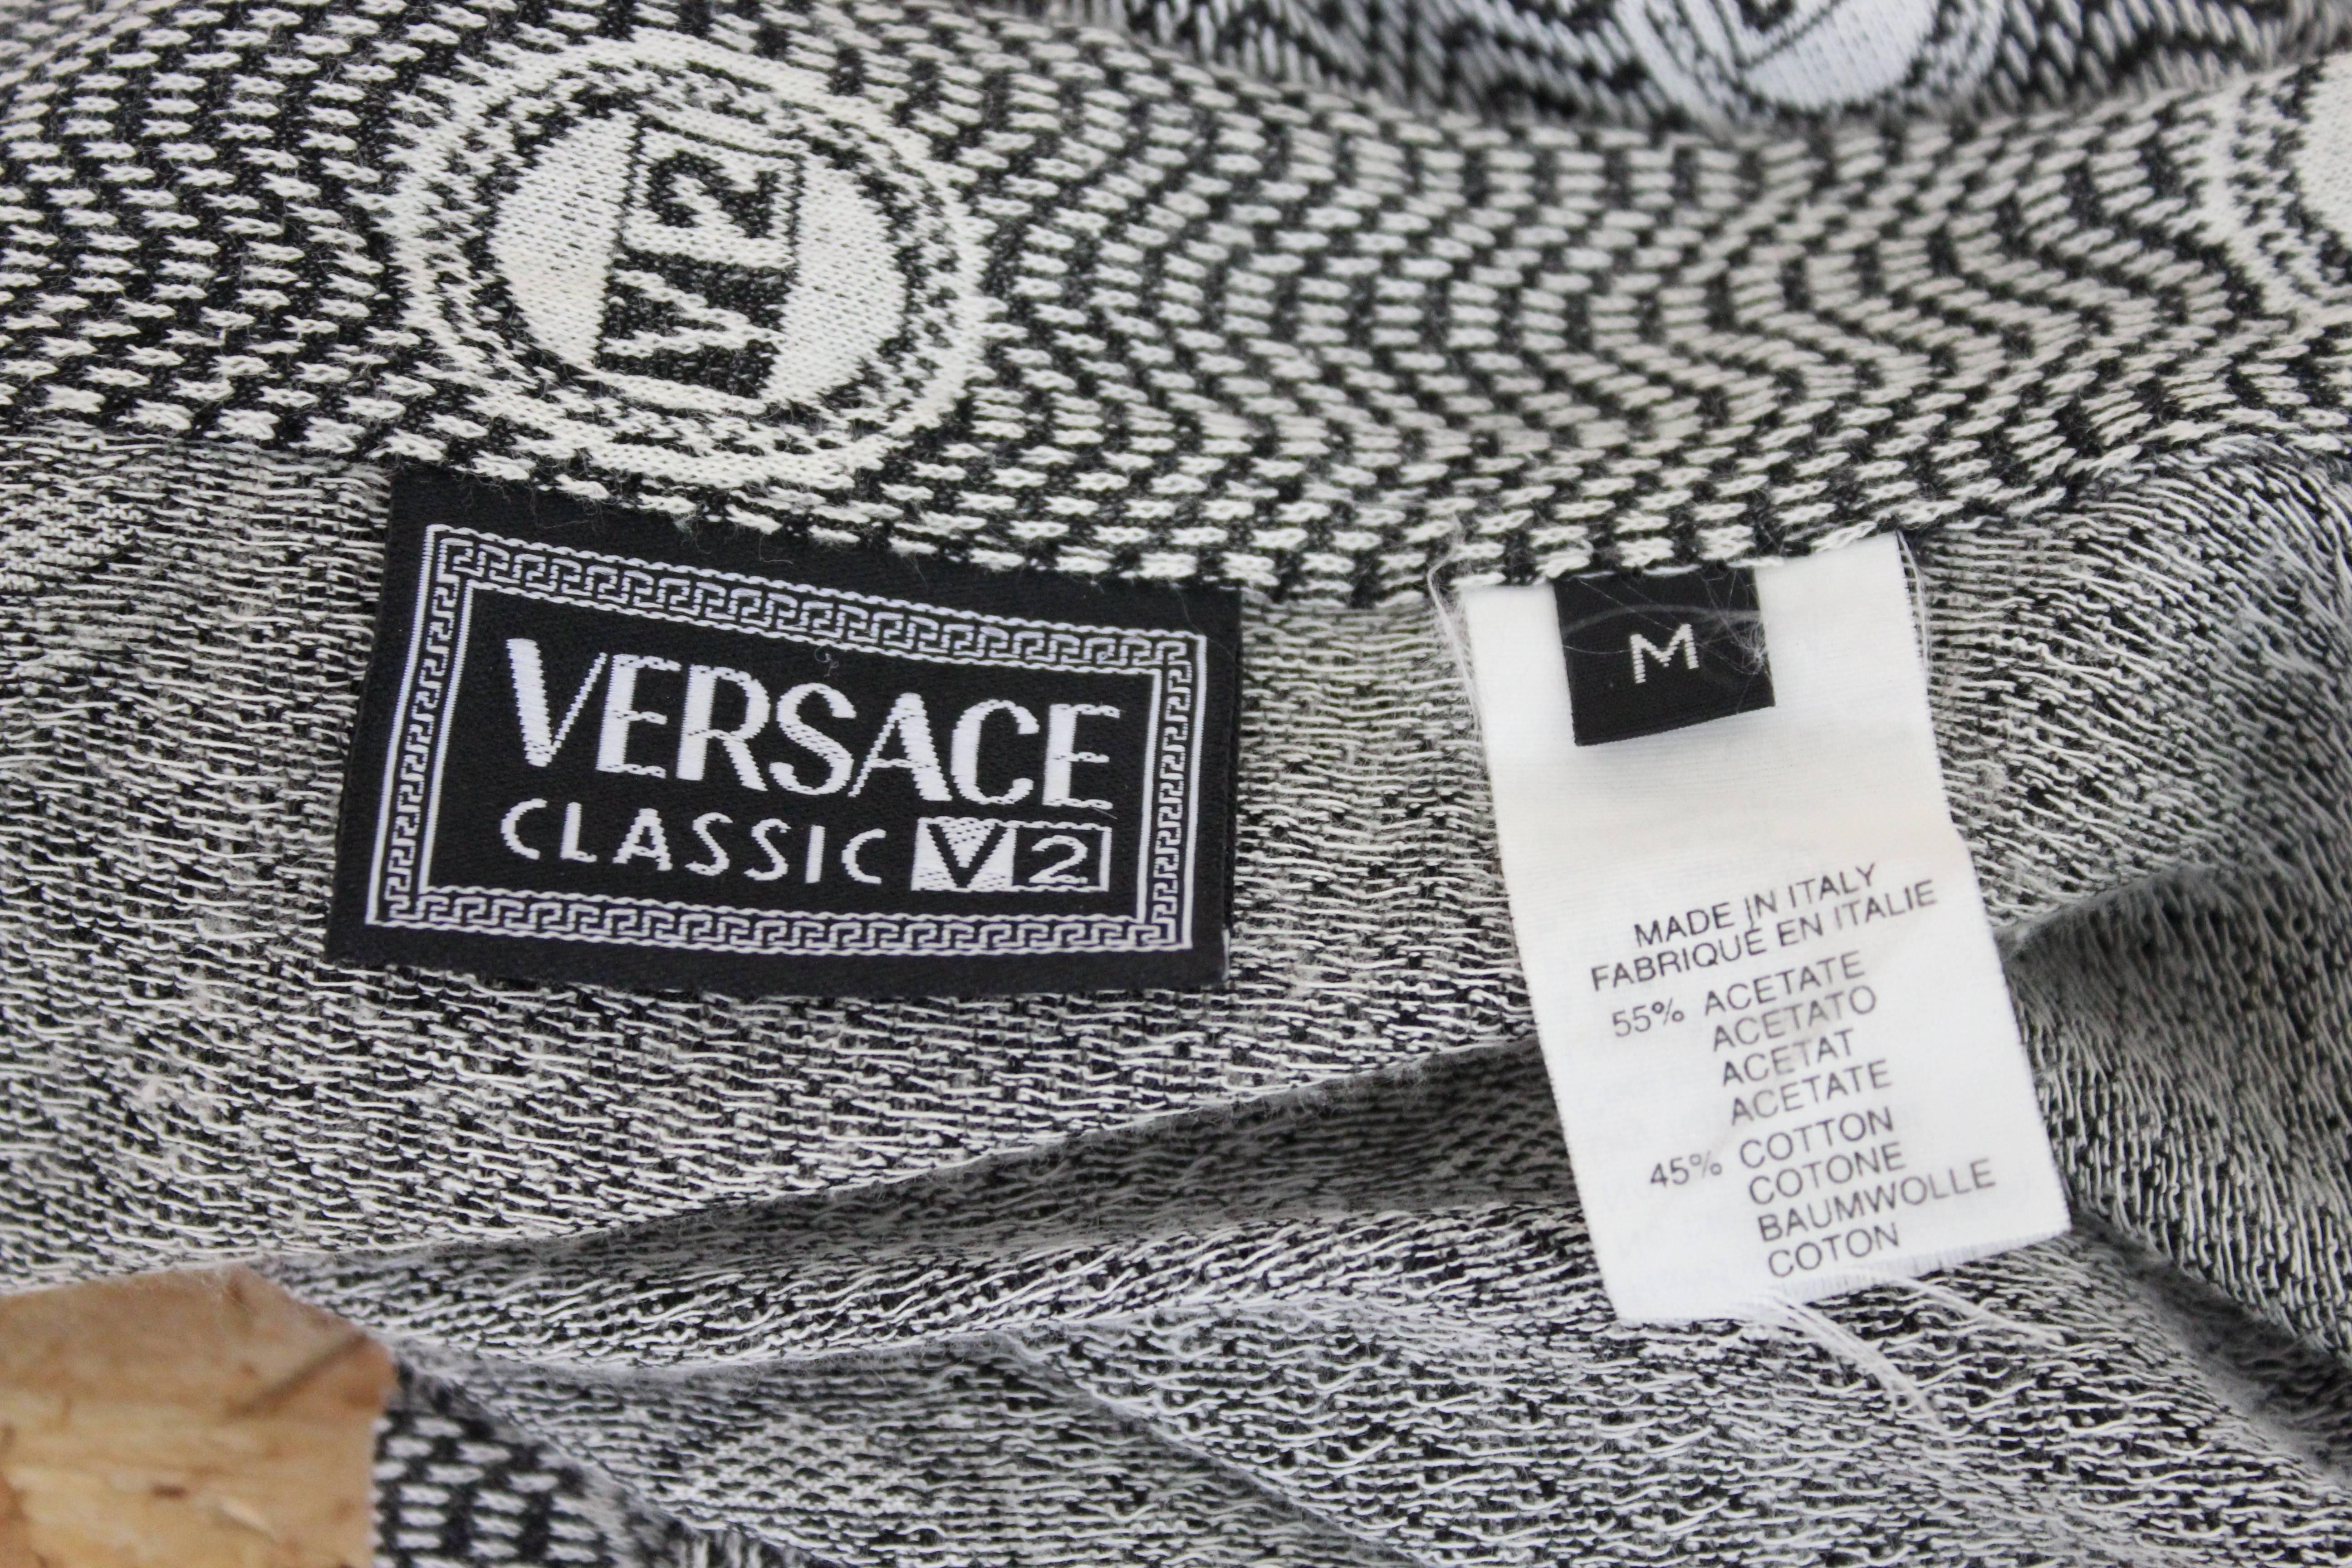 Gianni Versace Classic Monogram Cotton Blend Black and White Italian Shirt, 1990 For Sale 1